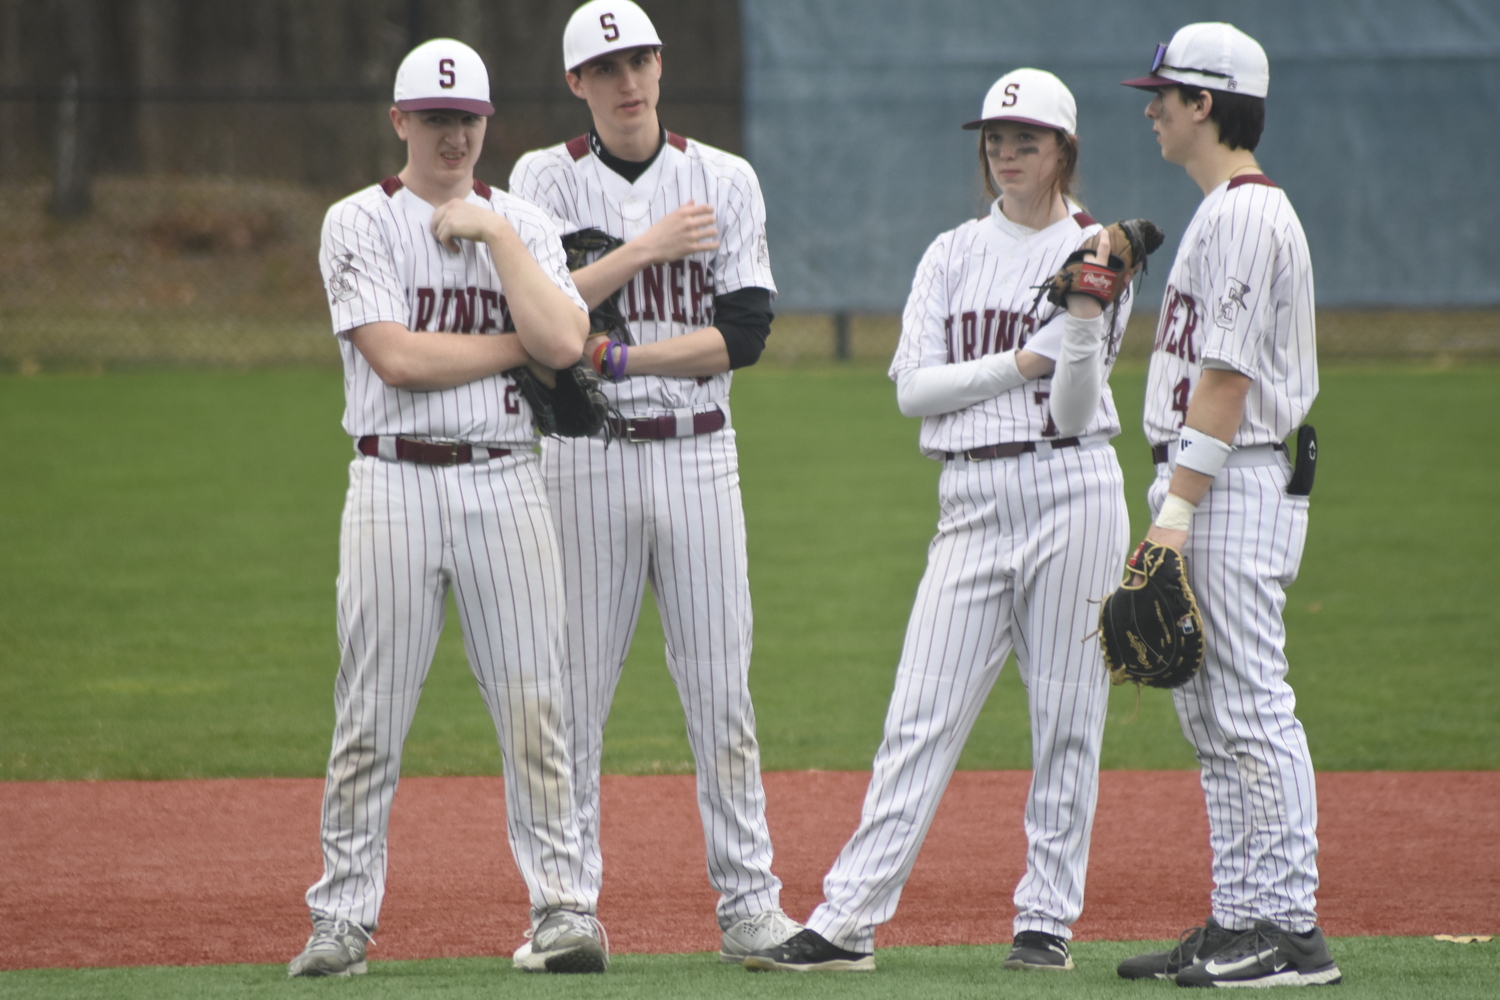 Daniel McDonnell, left, Declan Barbour, Bailey Brown and Cooper Helmsteadt watch Jackson Romanow take his warmup pitches during a pitching change.   DREW BUDD